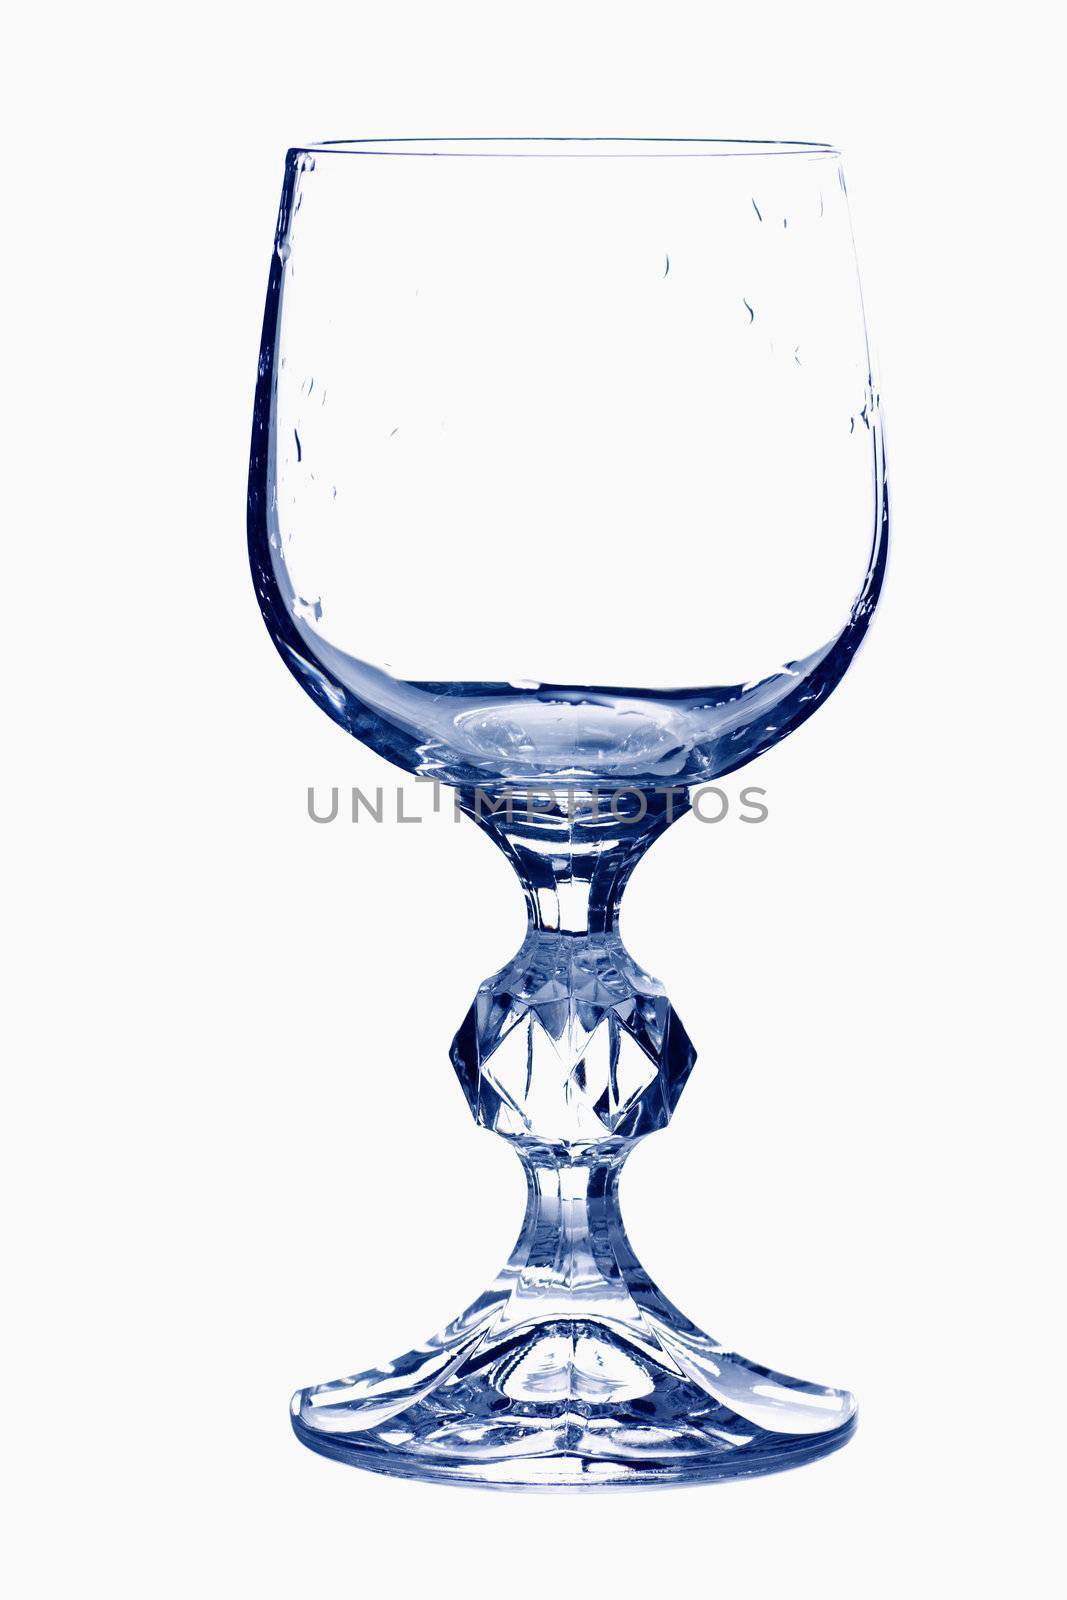 Empty wine glass in blue tones isolated over white